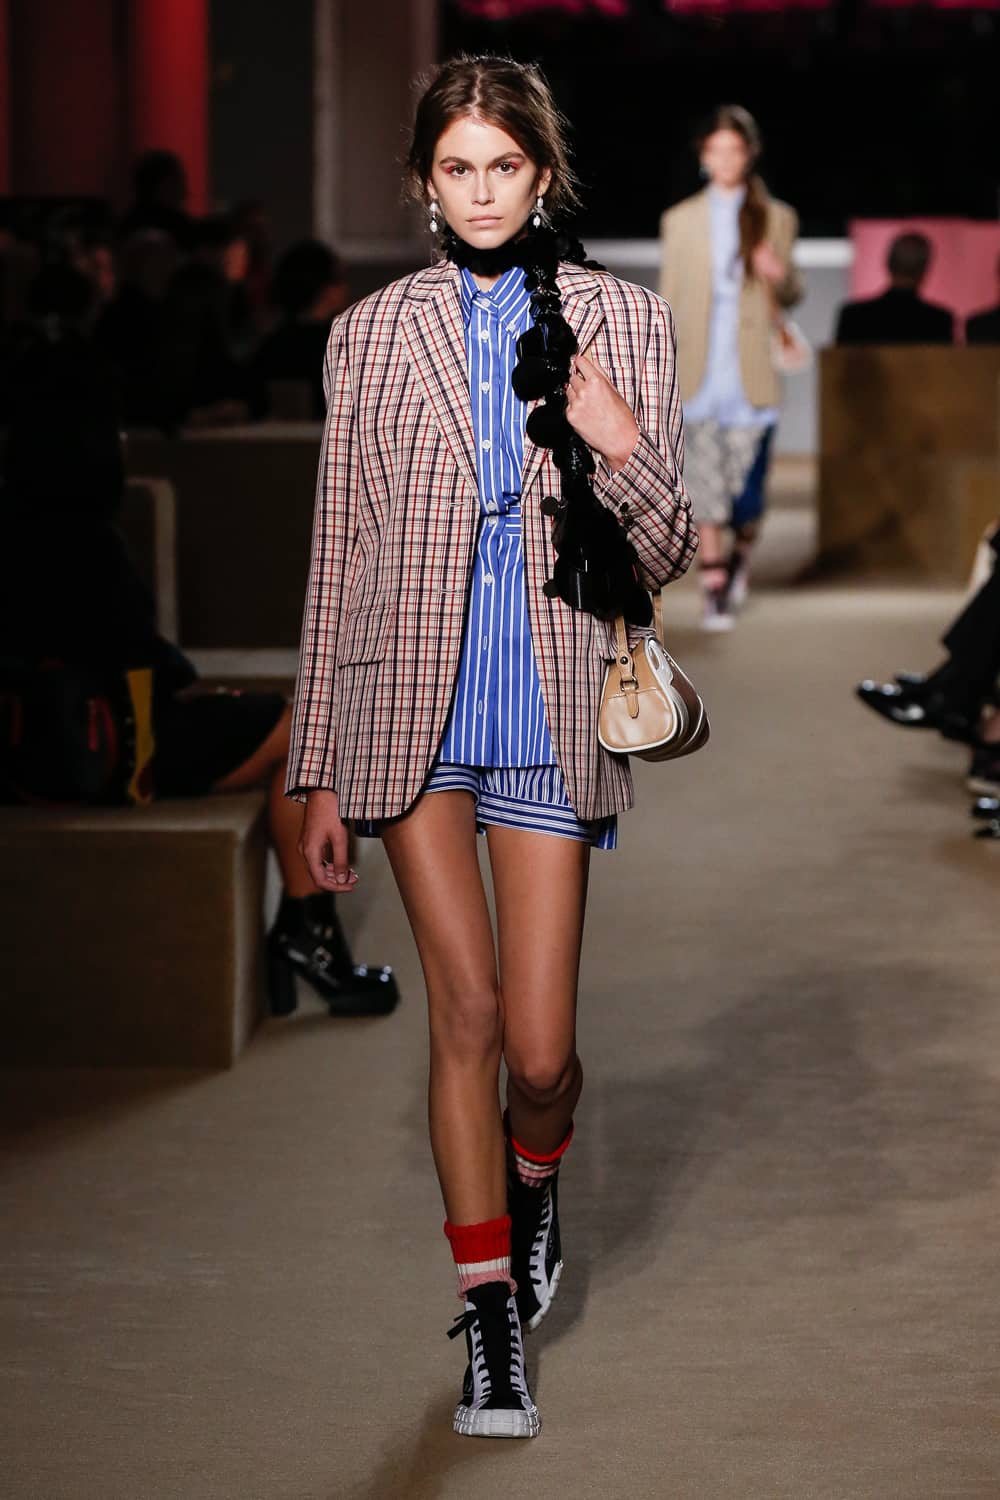 Rumors Swirl of a Possible Prada Sale, The Extended Decline of Barneys